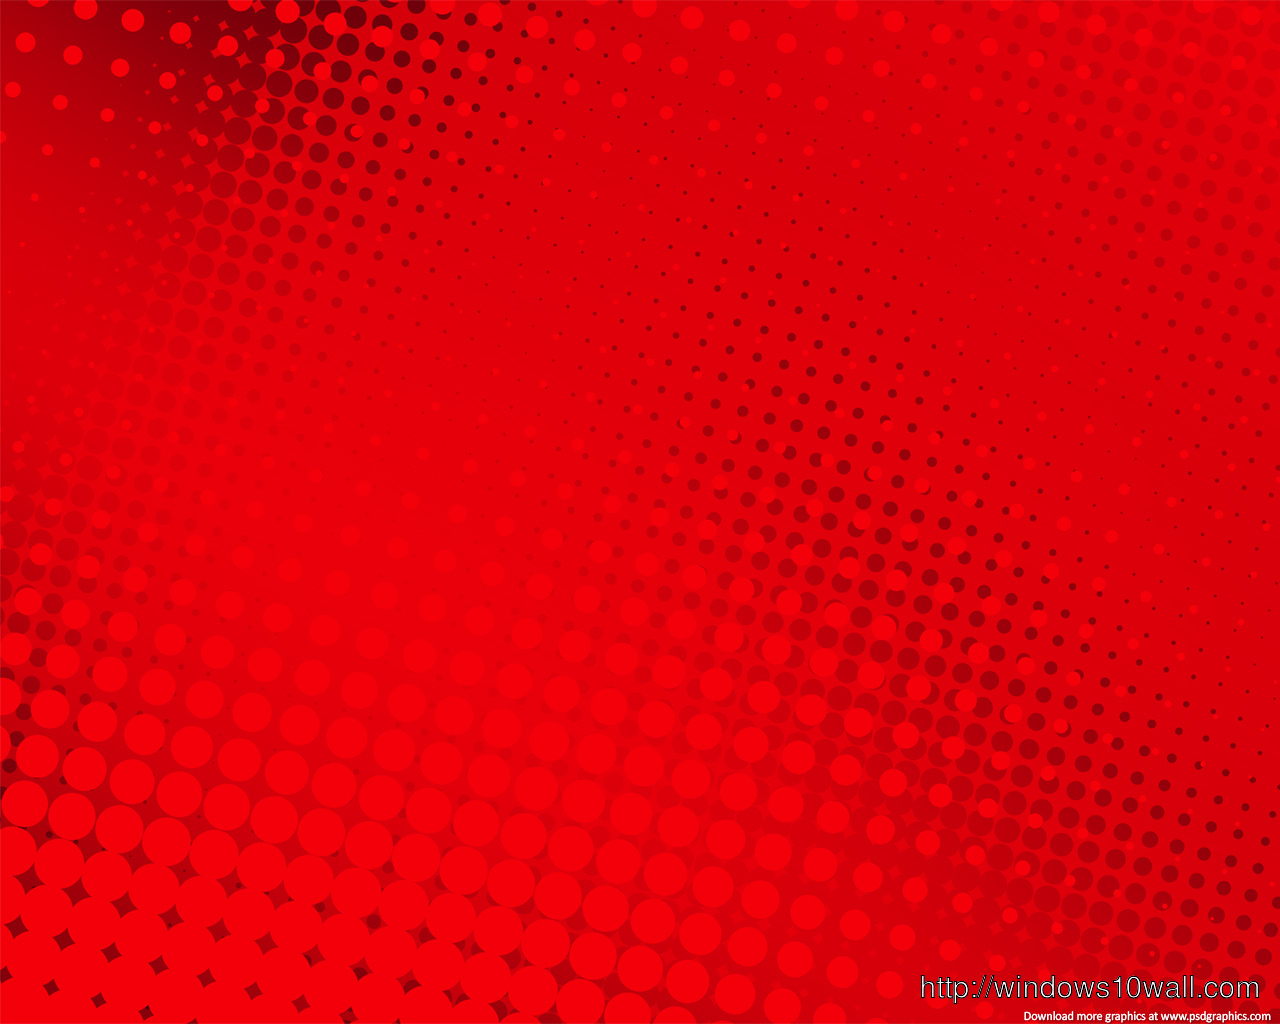 Red halftone background free download